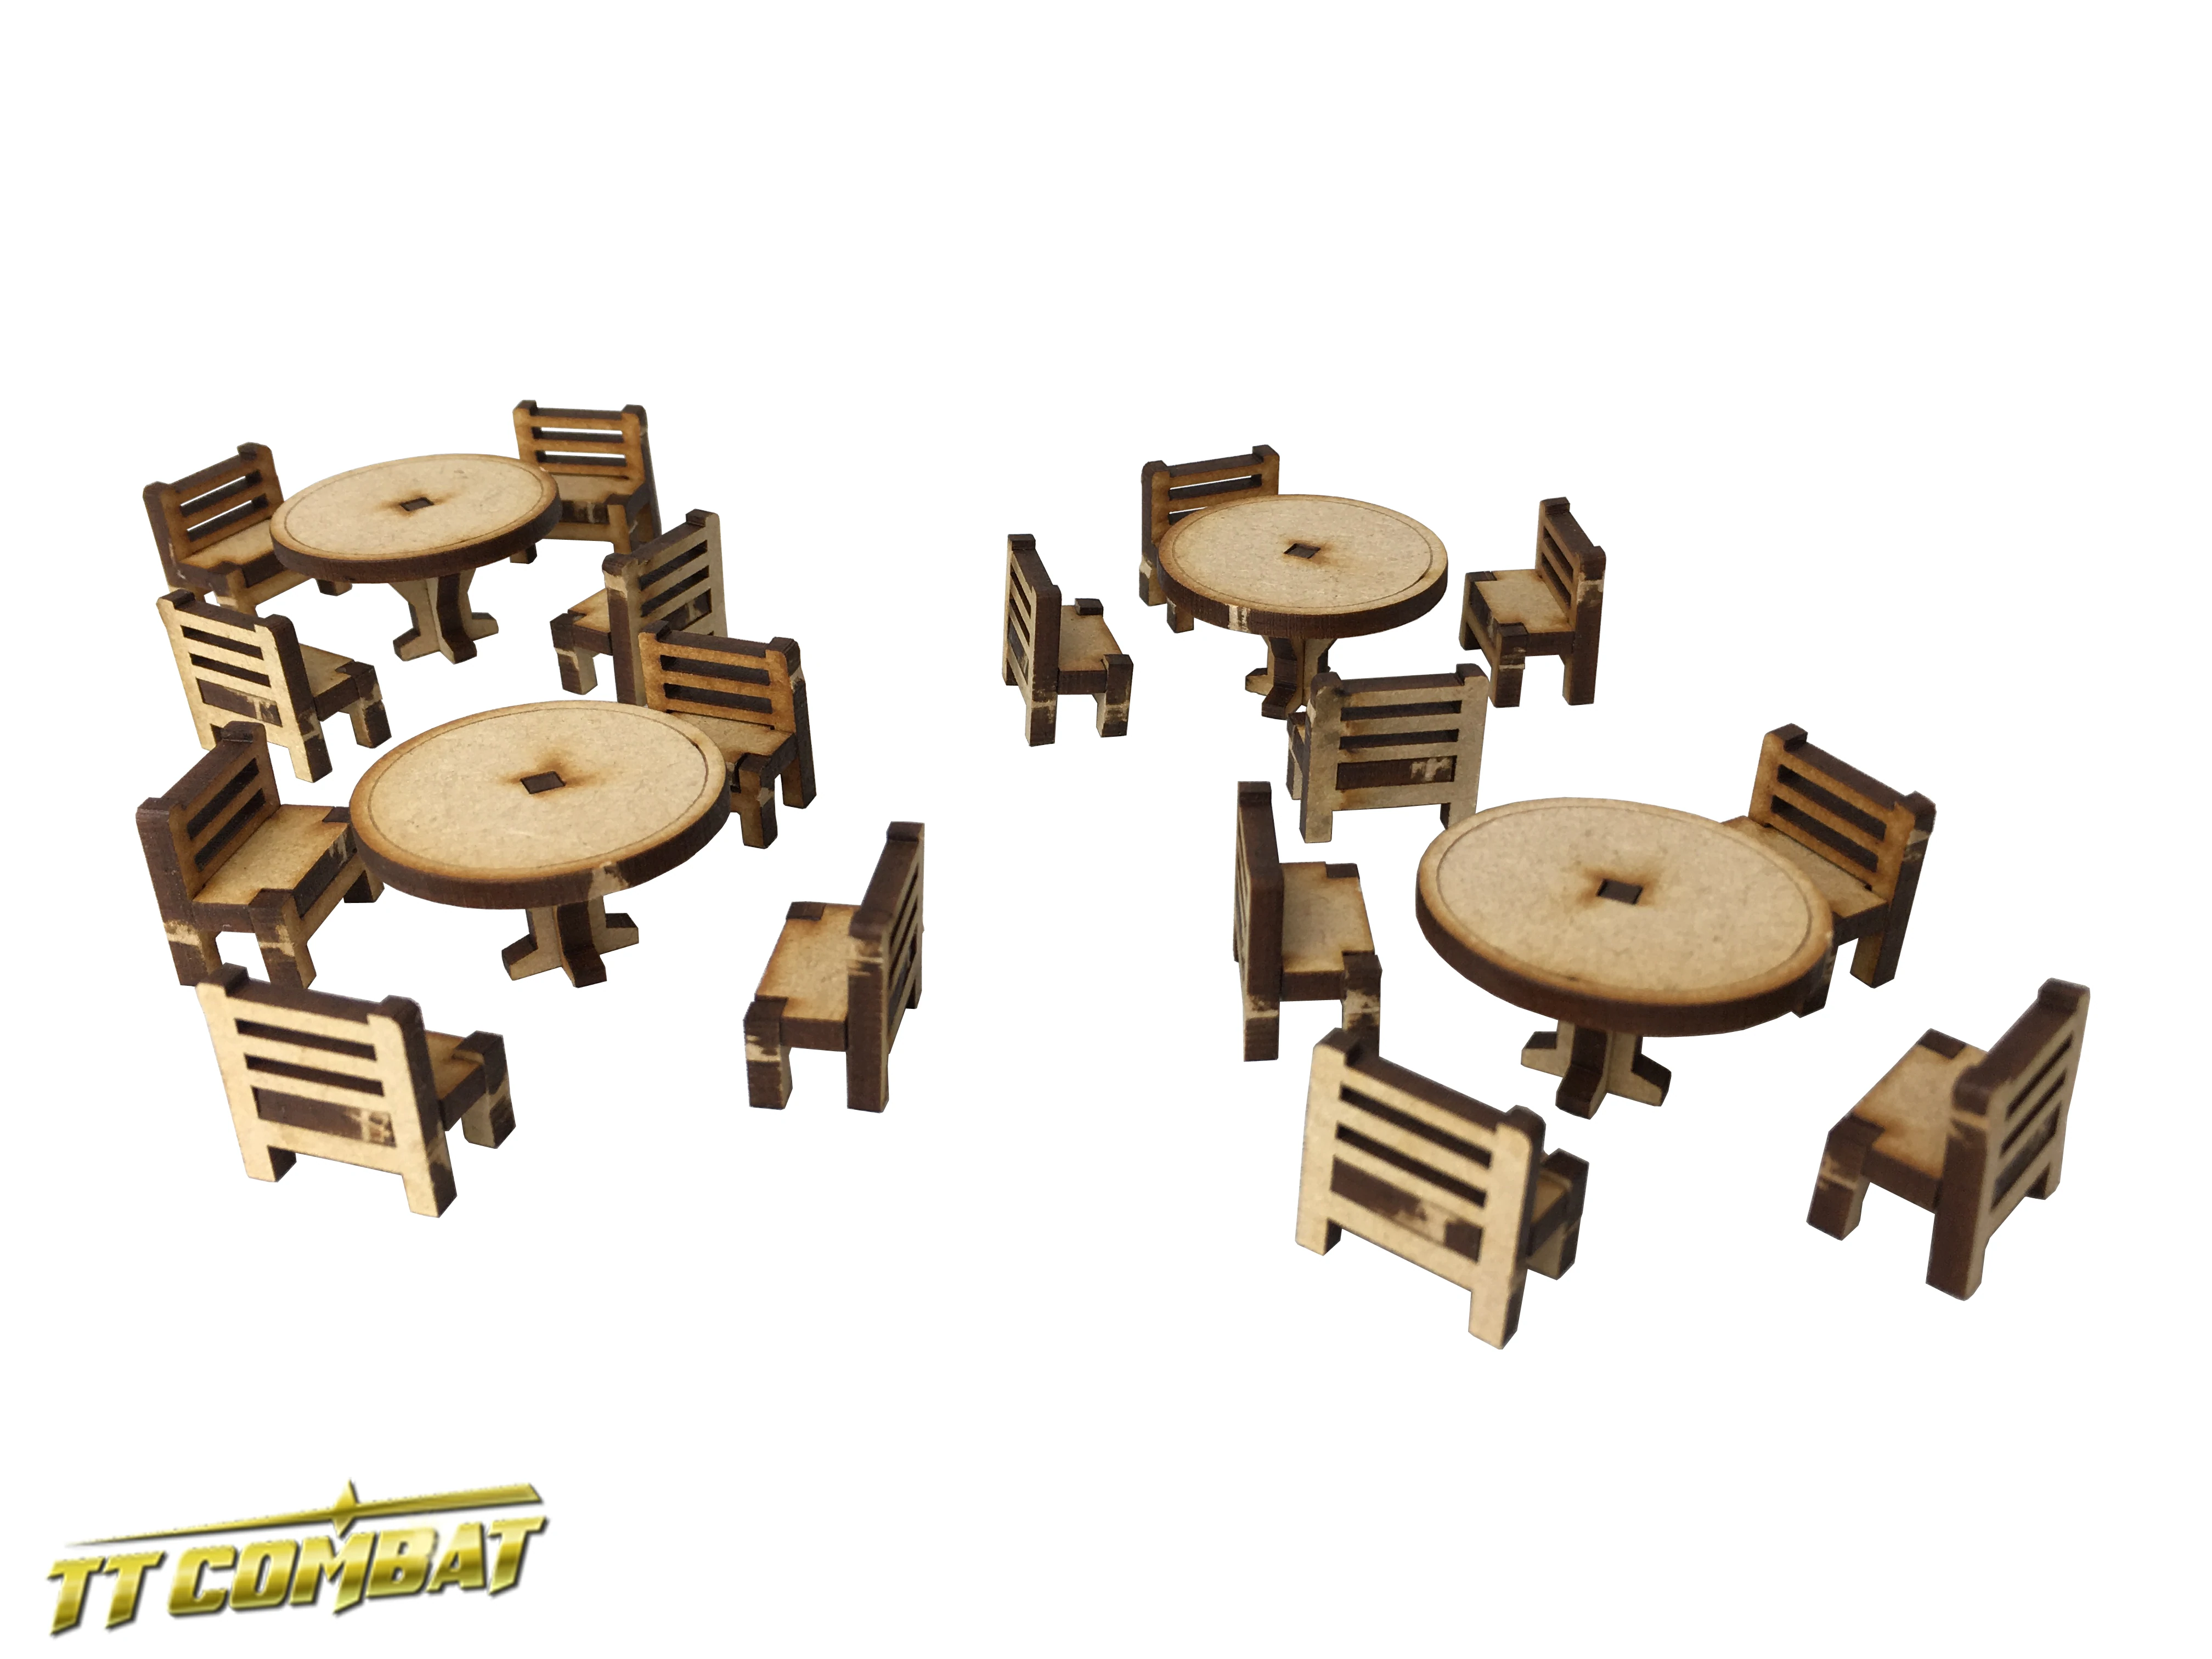 built tables and chairs terrain